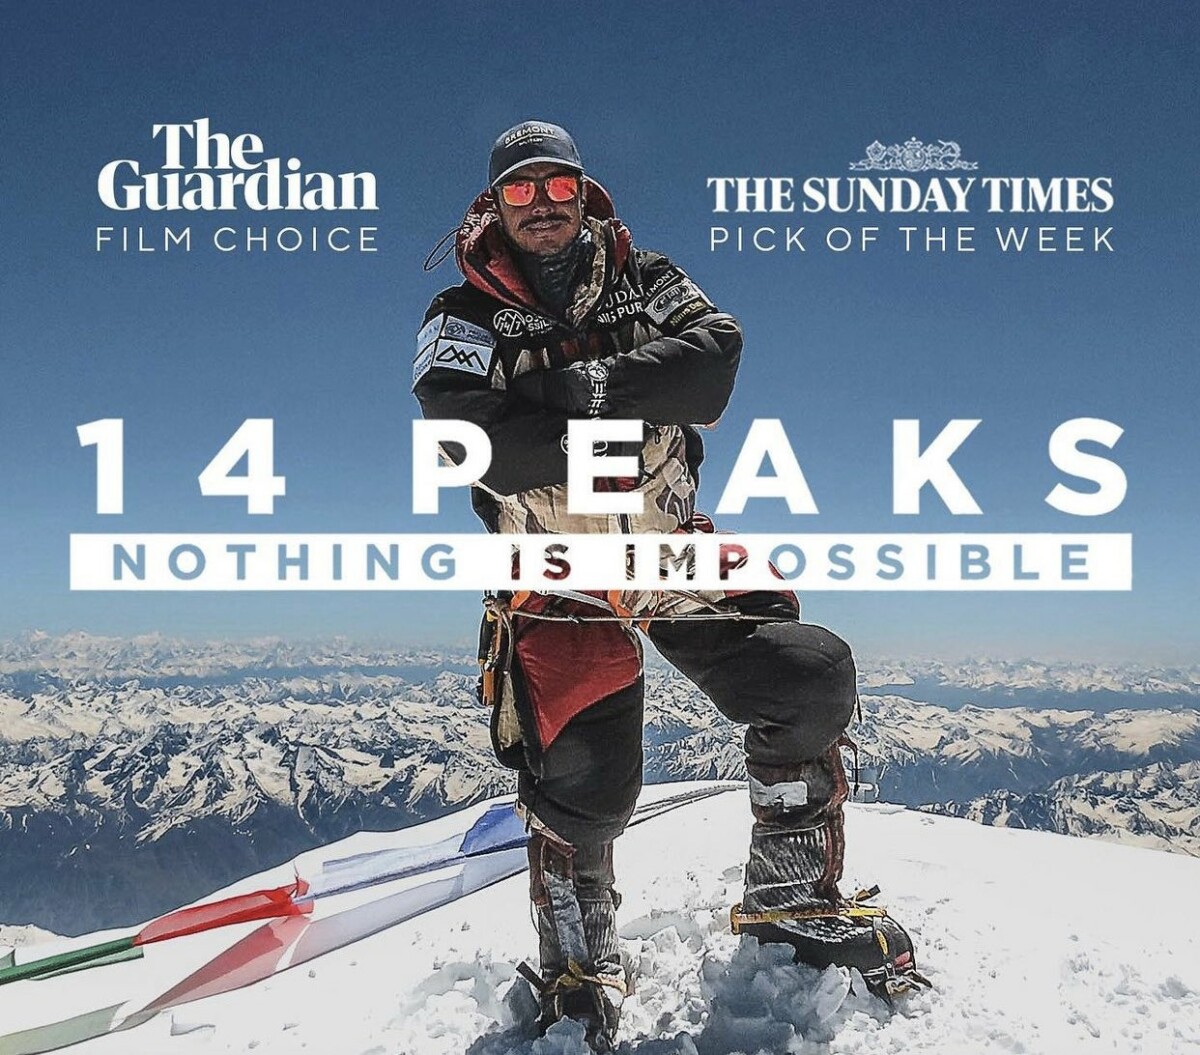 "14 Peaks: Nothing is Impossible"/Twitter